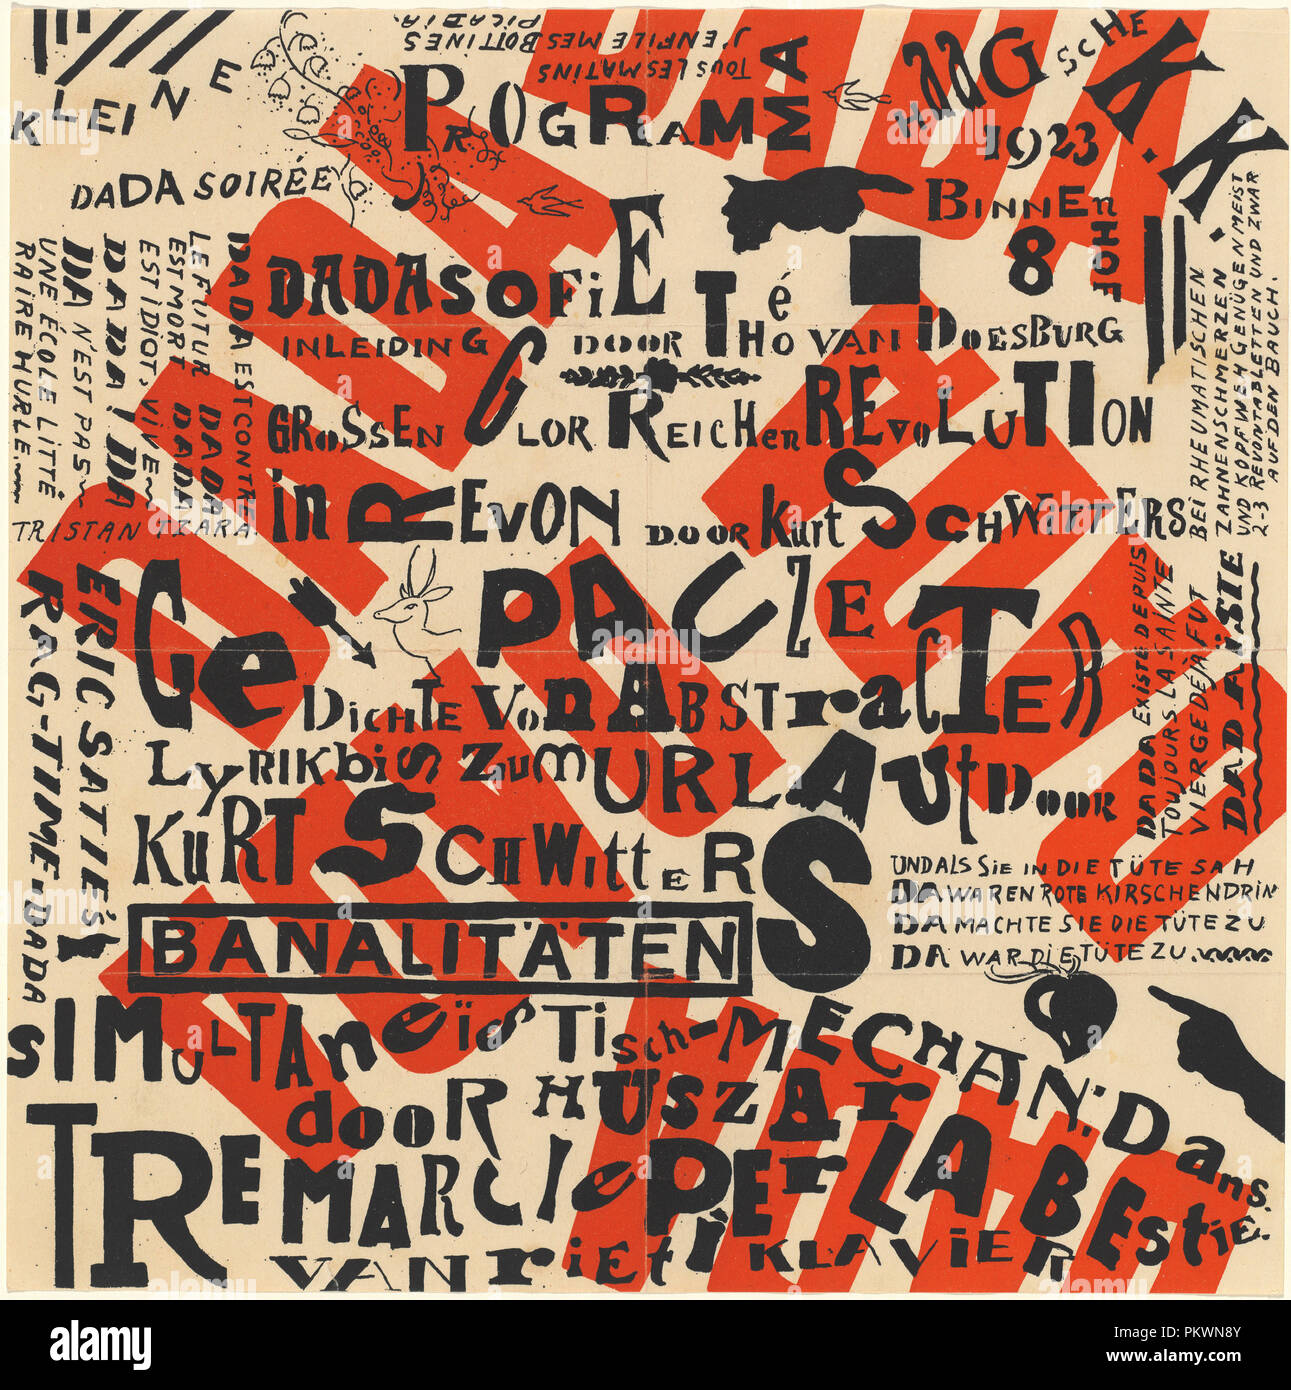 Kleine Dada Soirée (Small Dada Evening). Dated: 1922. Dimensions: sheet: 30.16 x 30.16 cm (11 7/8 x 11 7/8 in.). Medium: lithographic poster/program, printed in red and black on wove paper. Museum: National Gallery of Art, Washington DC. Author: Theo van Doesburg and Kurt Schwitters. THEO VAN DOESBURG. Kurt Schwitters. DOESBURG, THEO VAN. Stock Photo